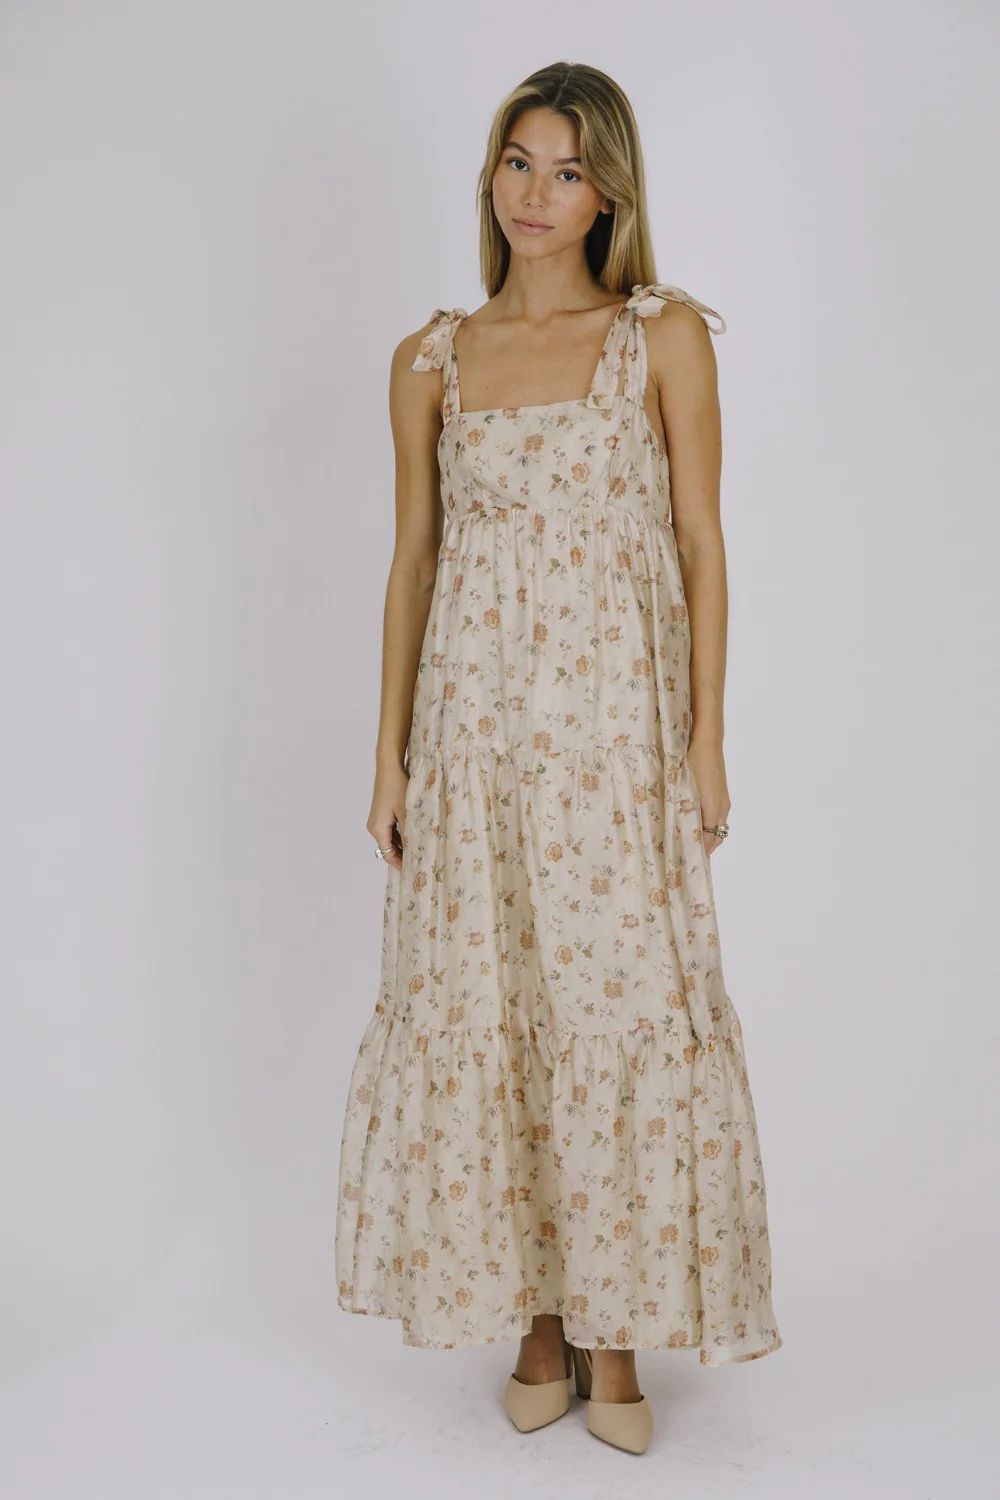 Cream Floral Shoulder Tie Tiered Maxi Dress | PinkBlush Maternity